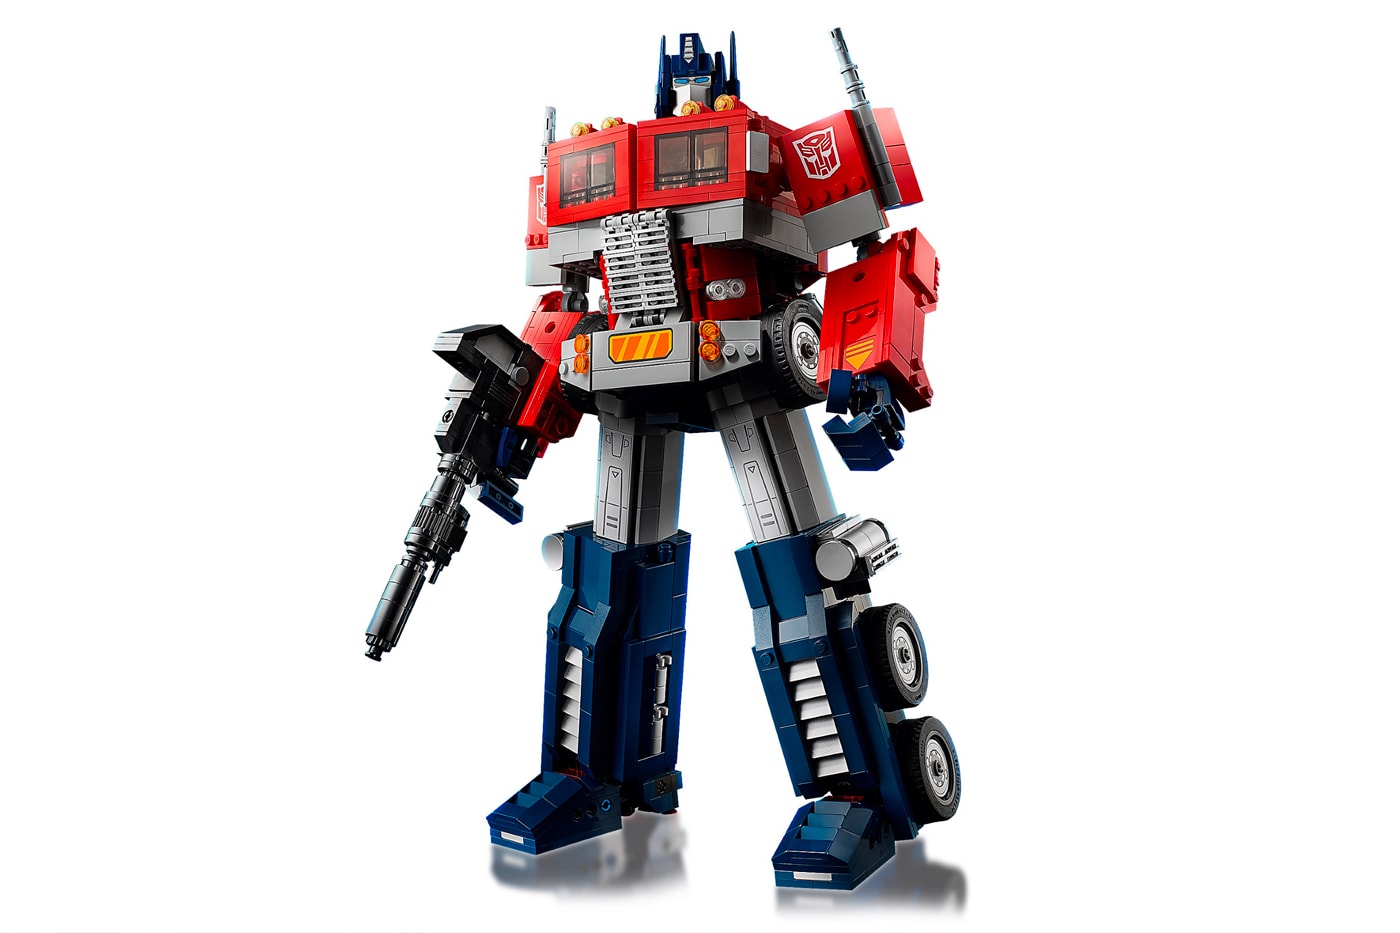 Save 15% Off the LEGO Transformers Optimus Prime 1,508-Piece Building Kit